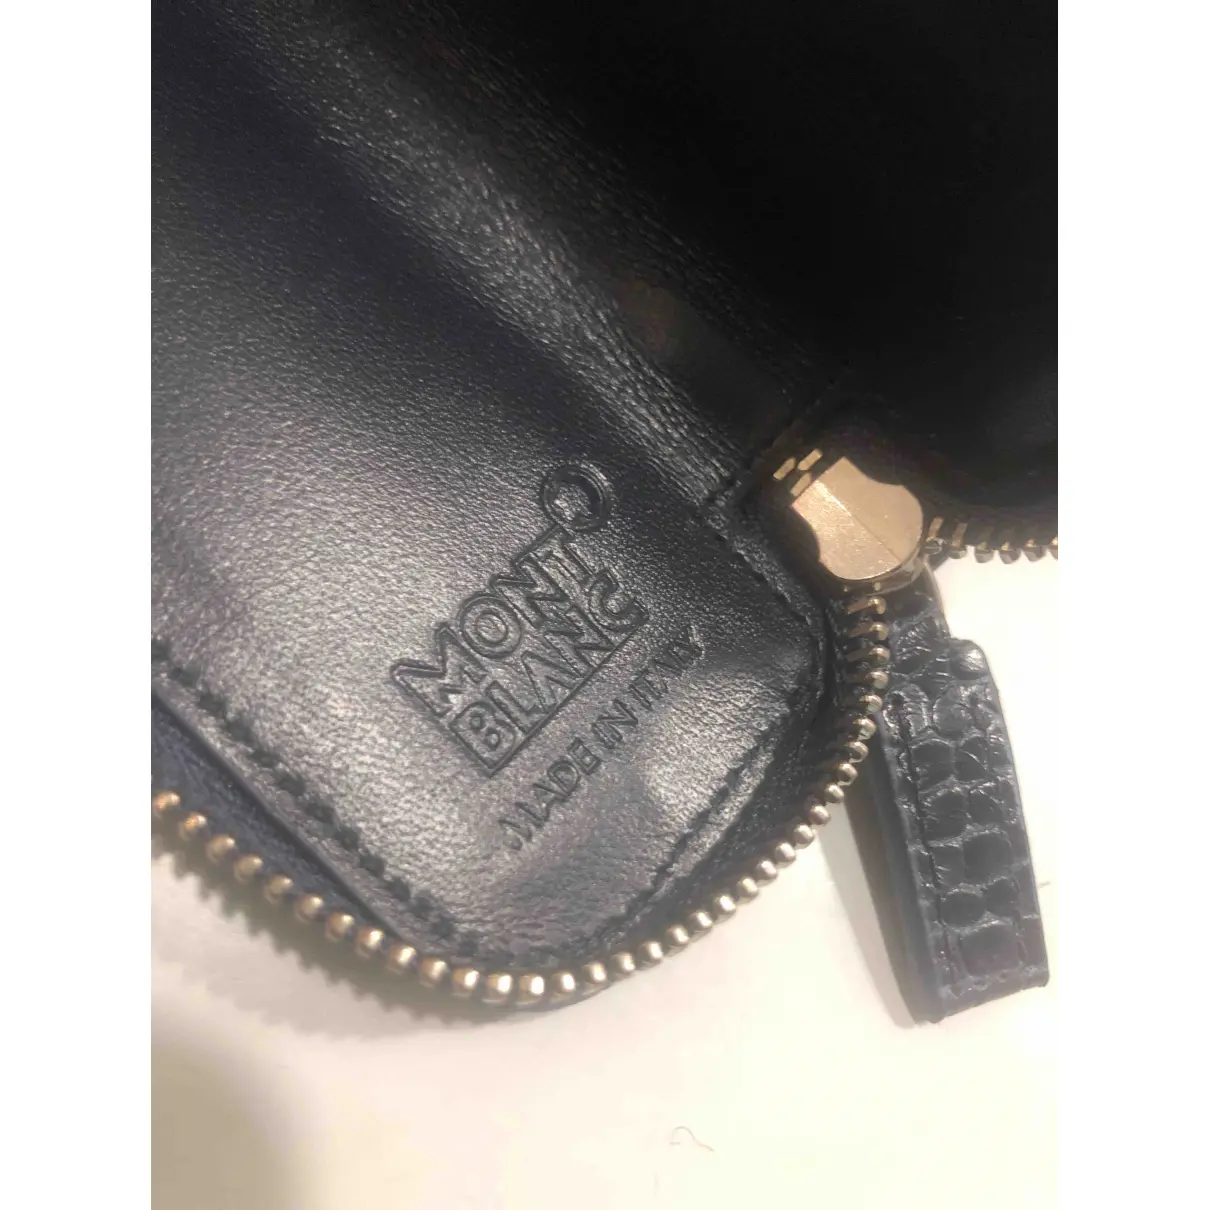 Meisterstück leather small bag Montblanc